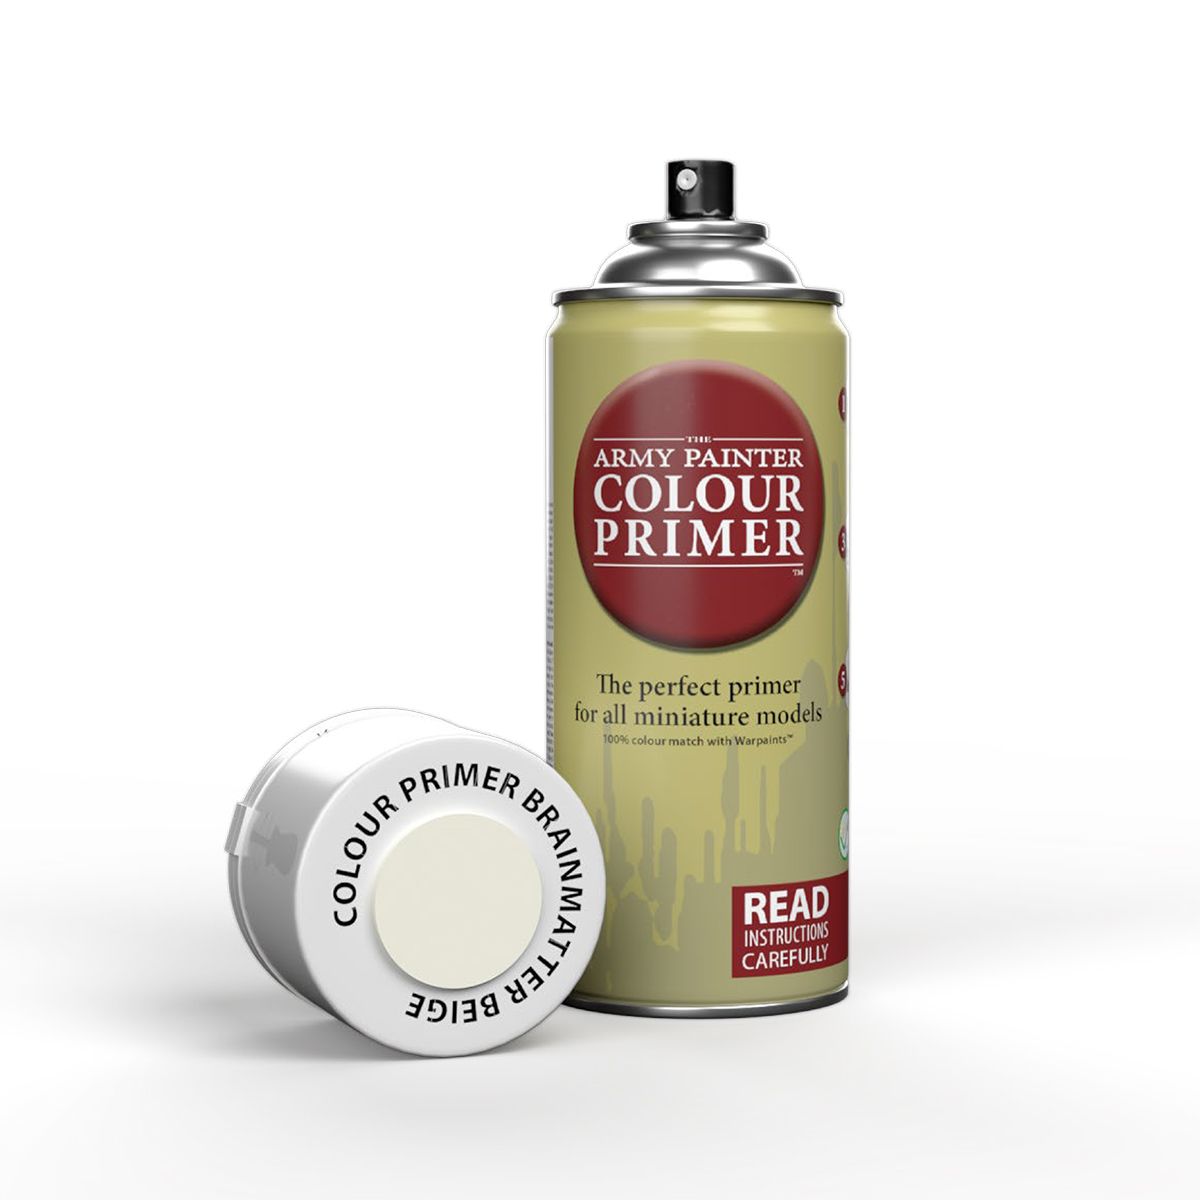 Army Painter Colour Primer - Brainmatter Beige (400ml) - Loaded Dice